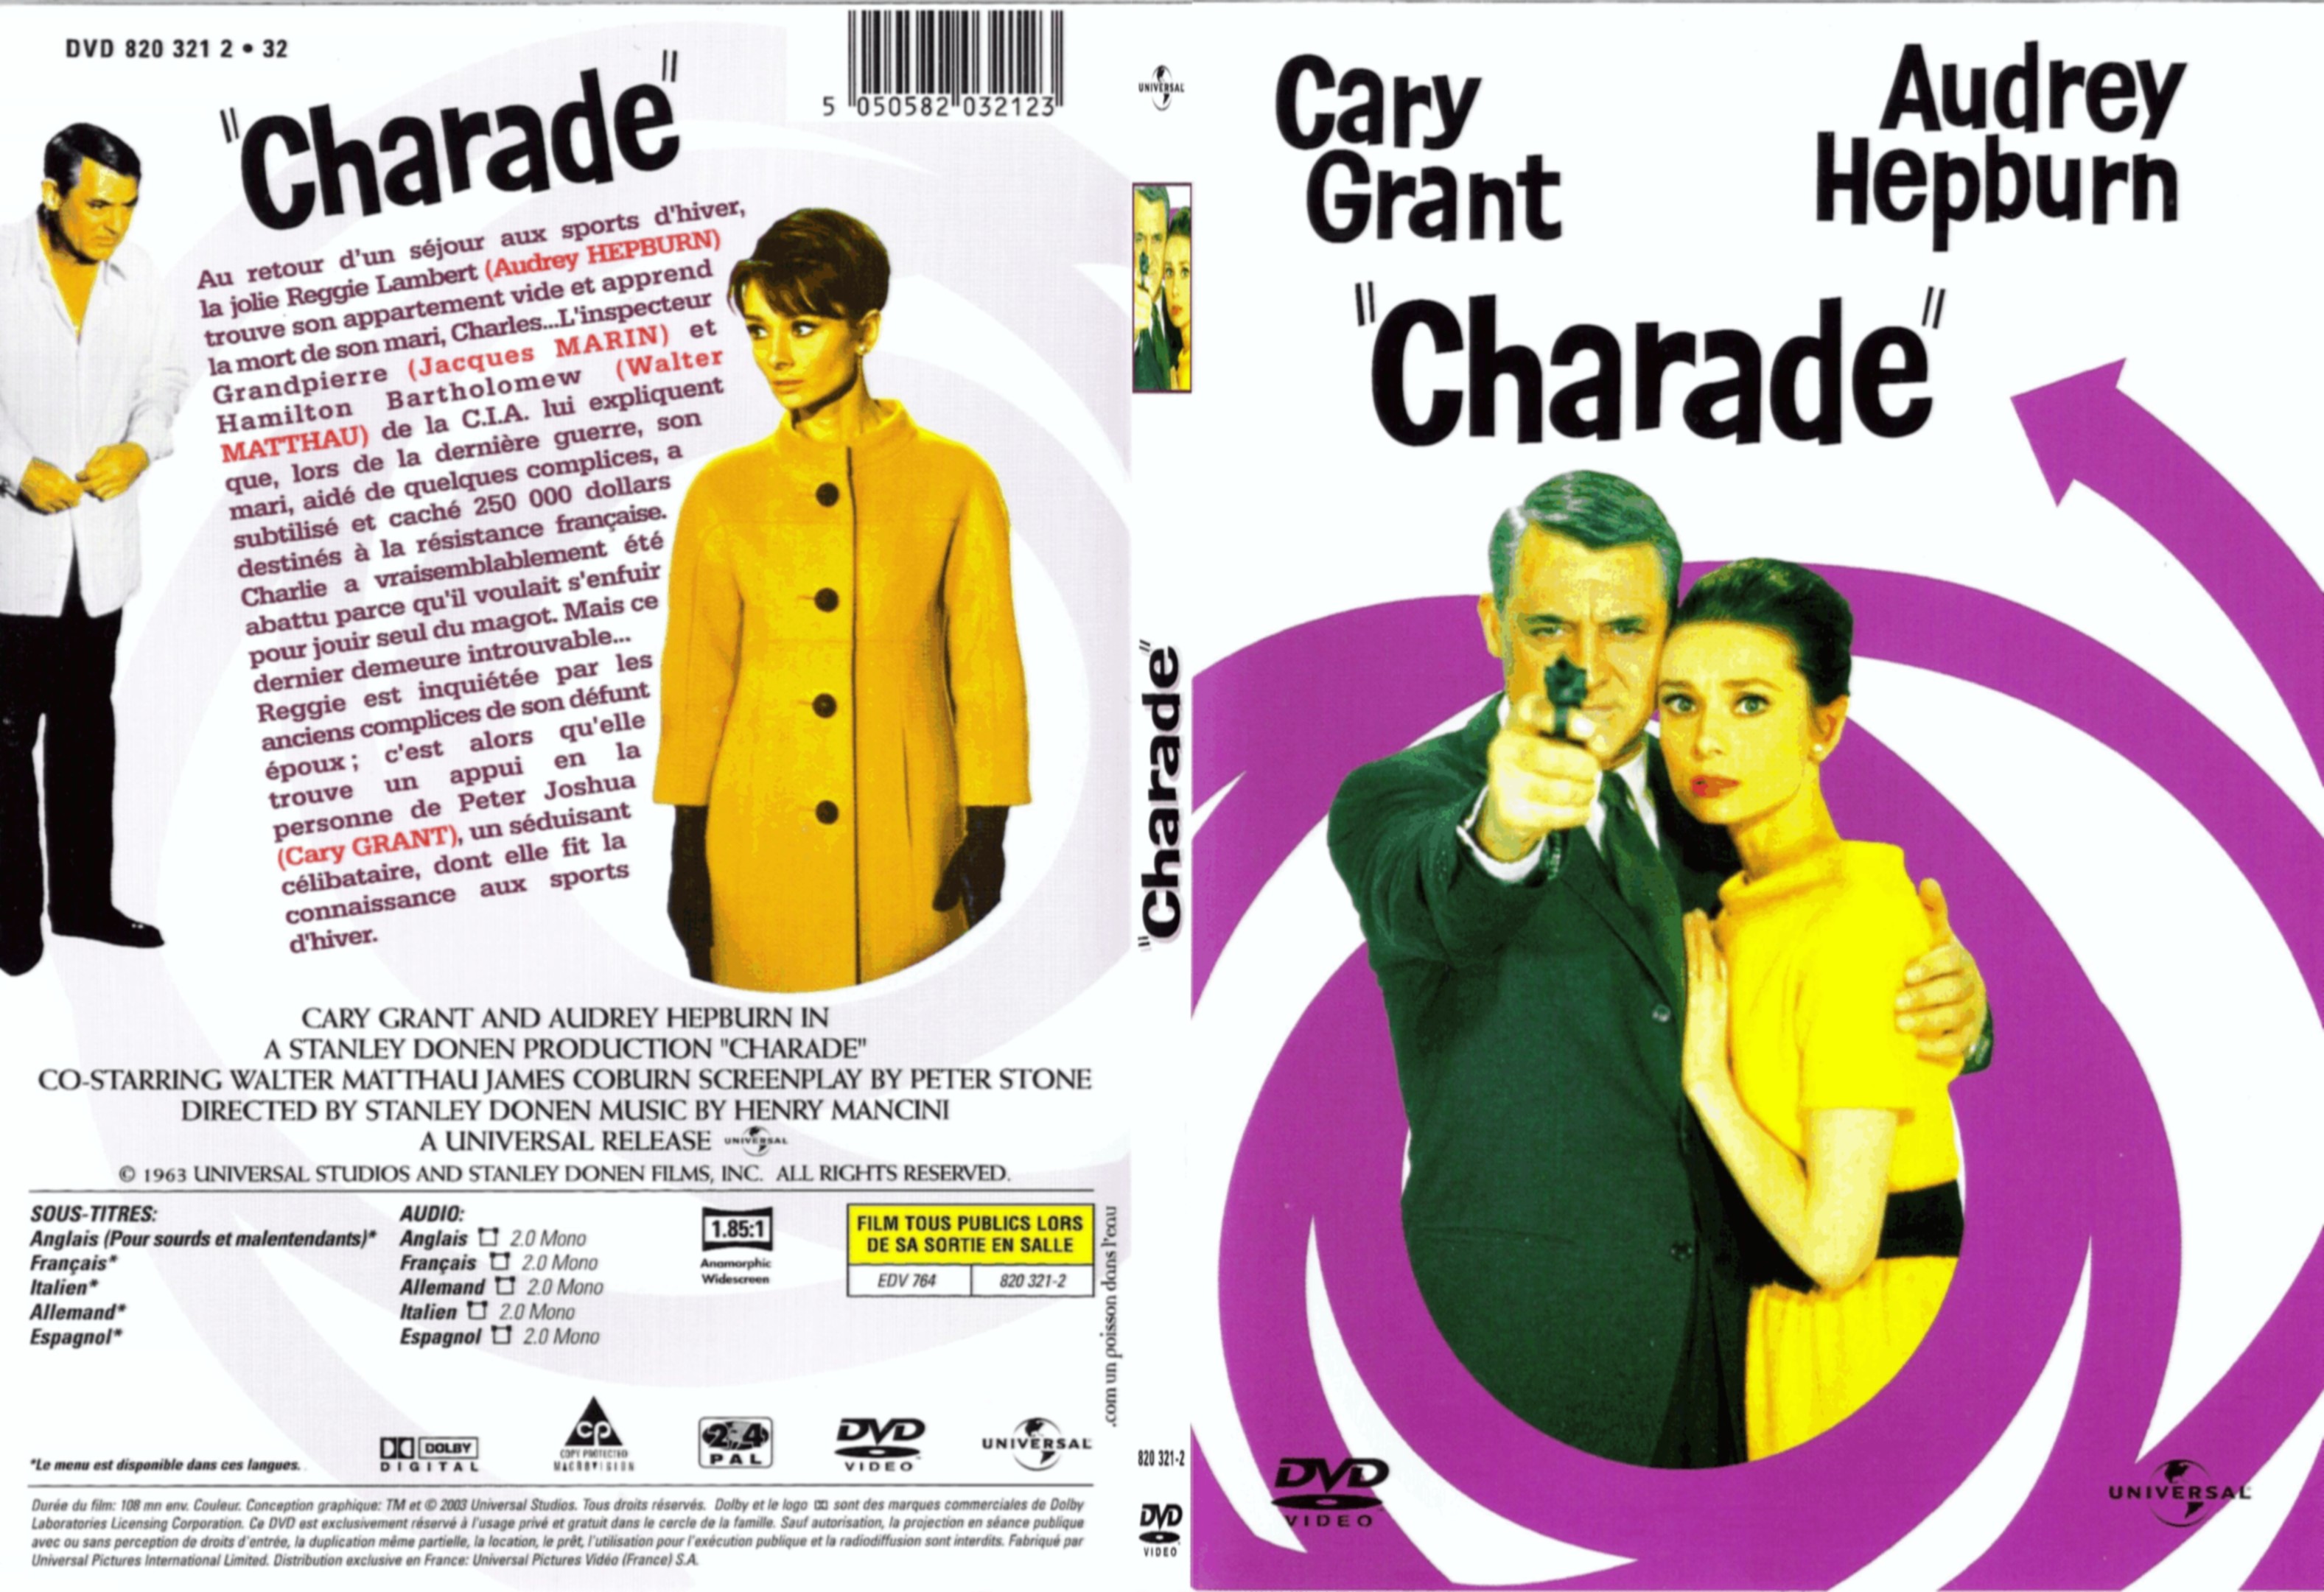 Jaquette DVD Charade - SLIM